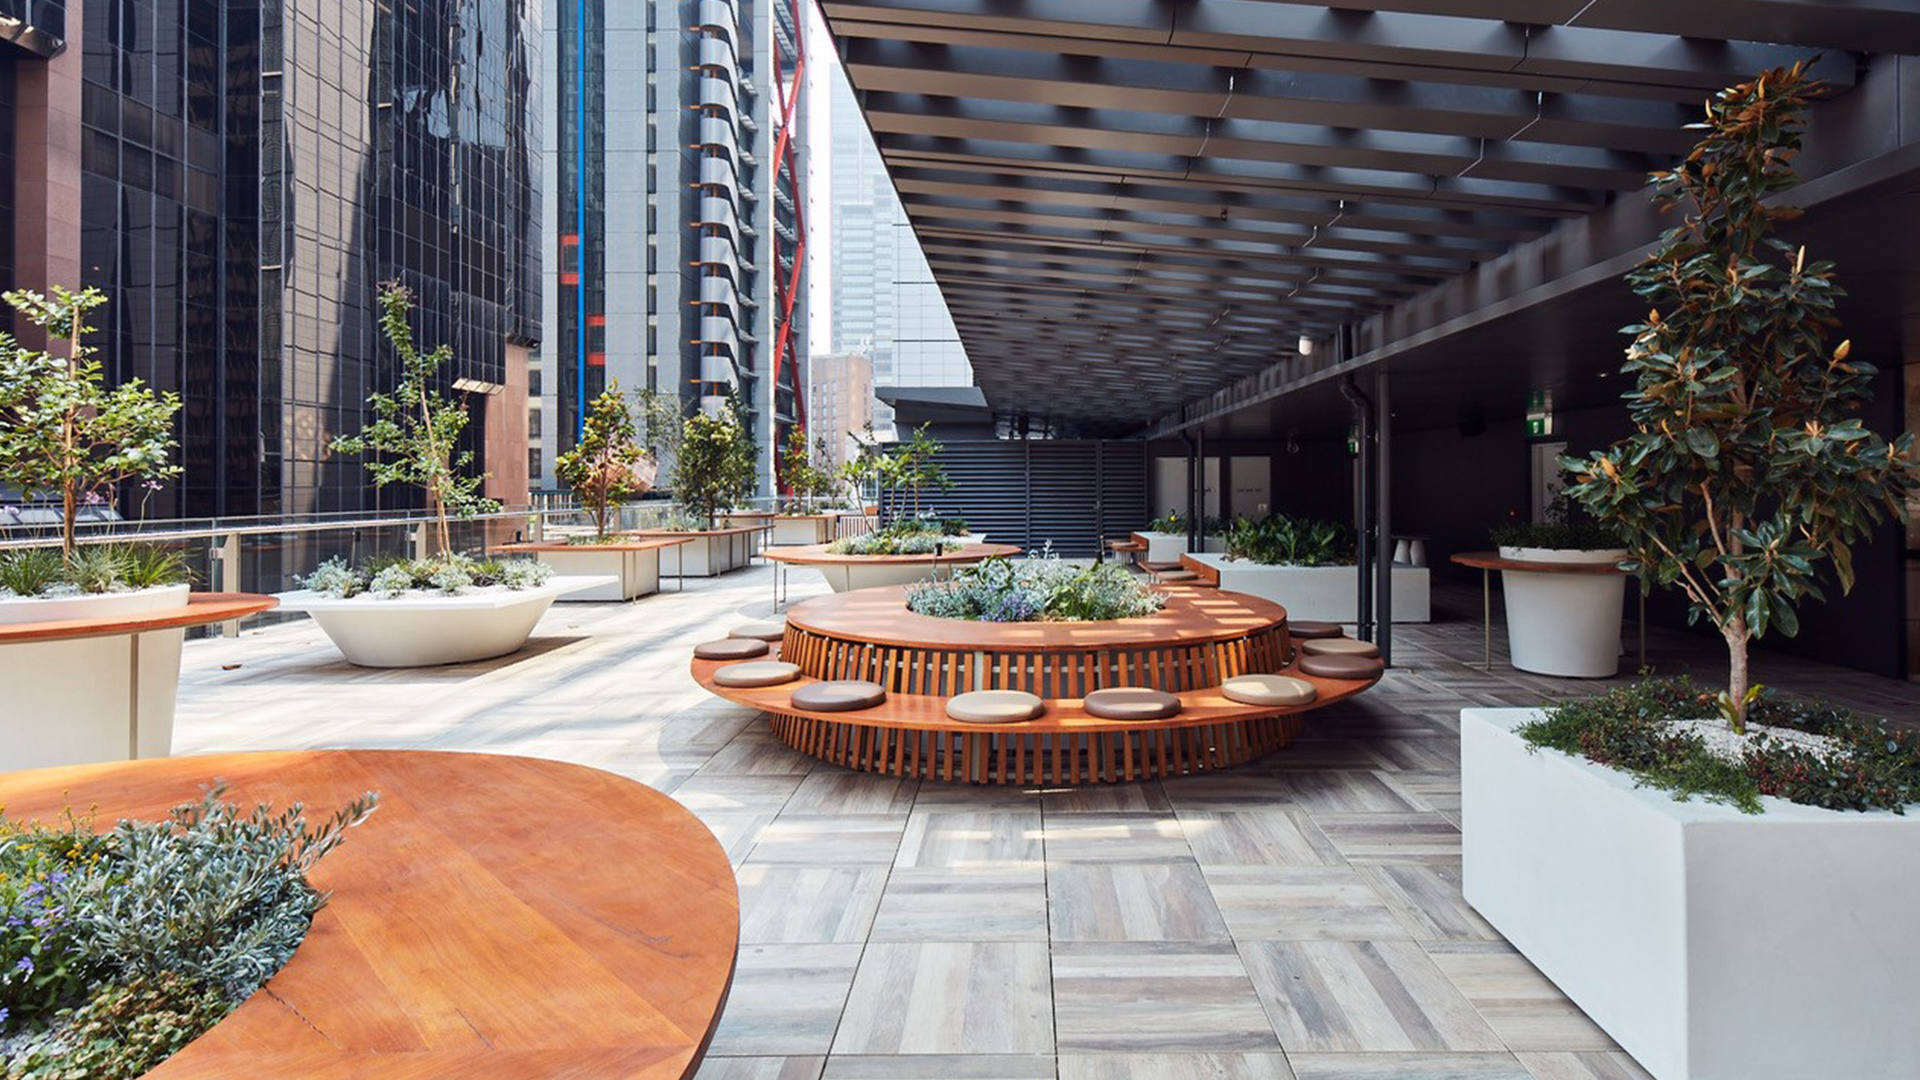 Outdoor terrace seating